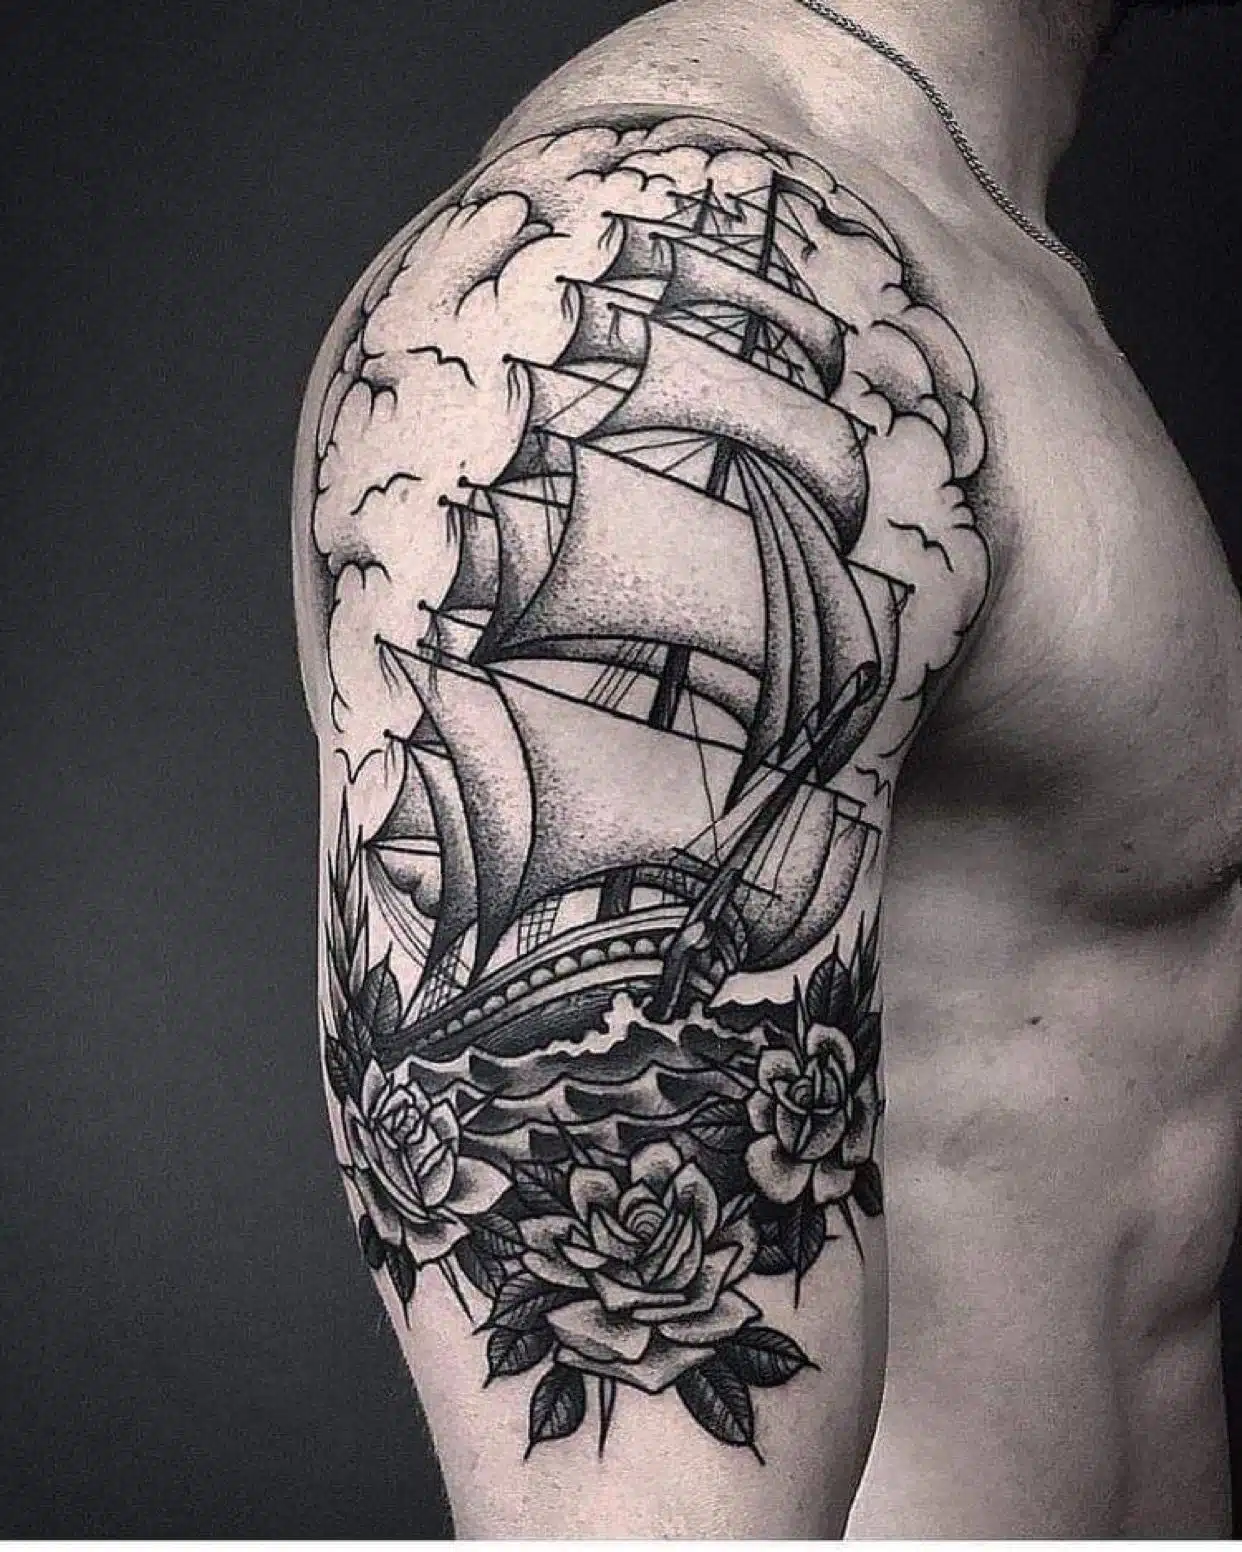 Old school traditional ship tattoo